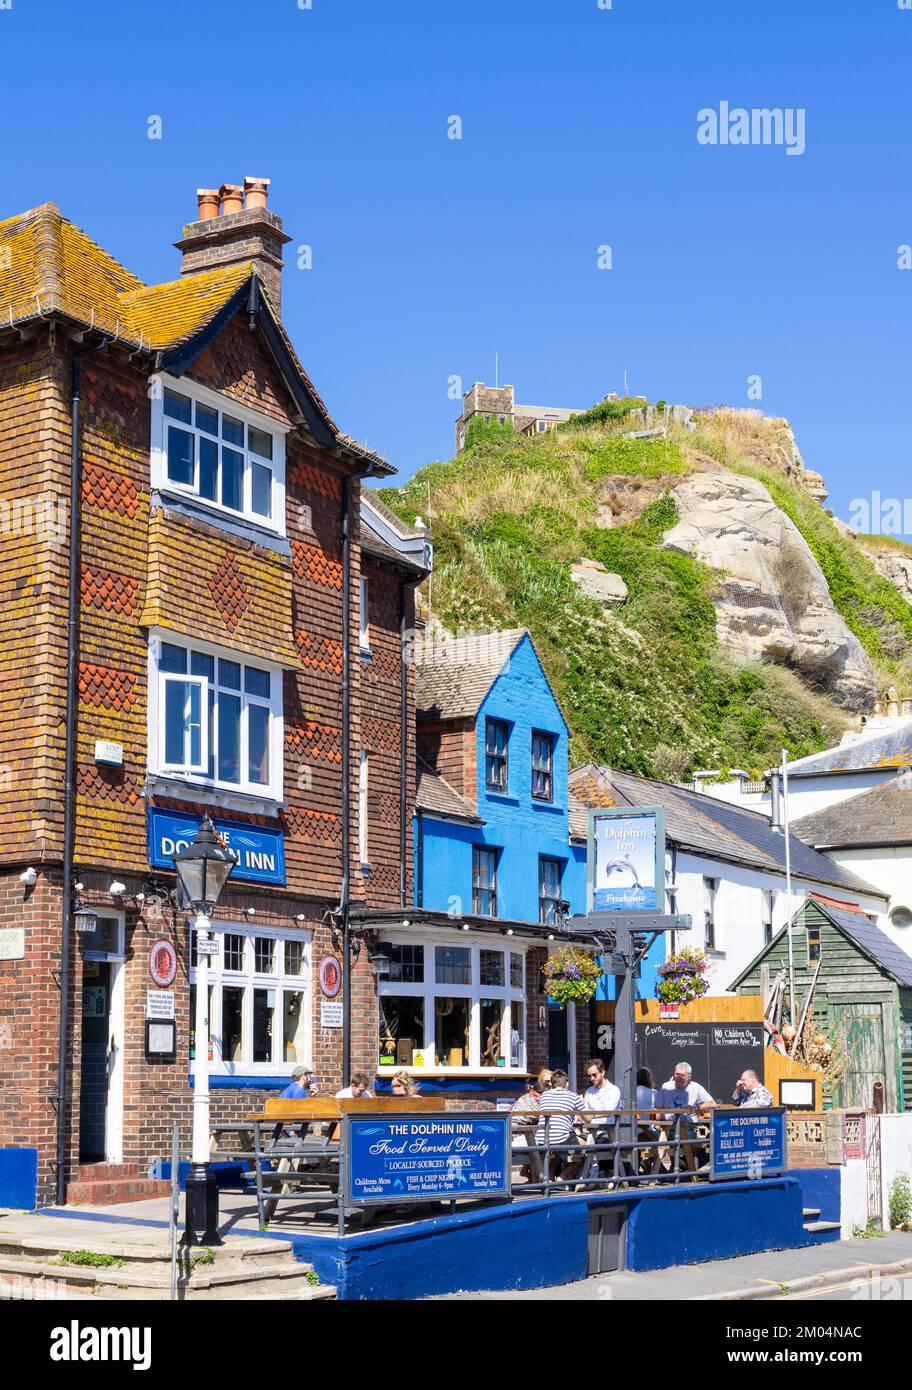 Hastings people sat outside the Dolphin Inn on Rock-a-nore road Hastings old Town Hastings East Sussex England UK GB Europe Stock Photo